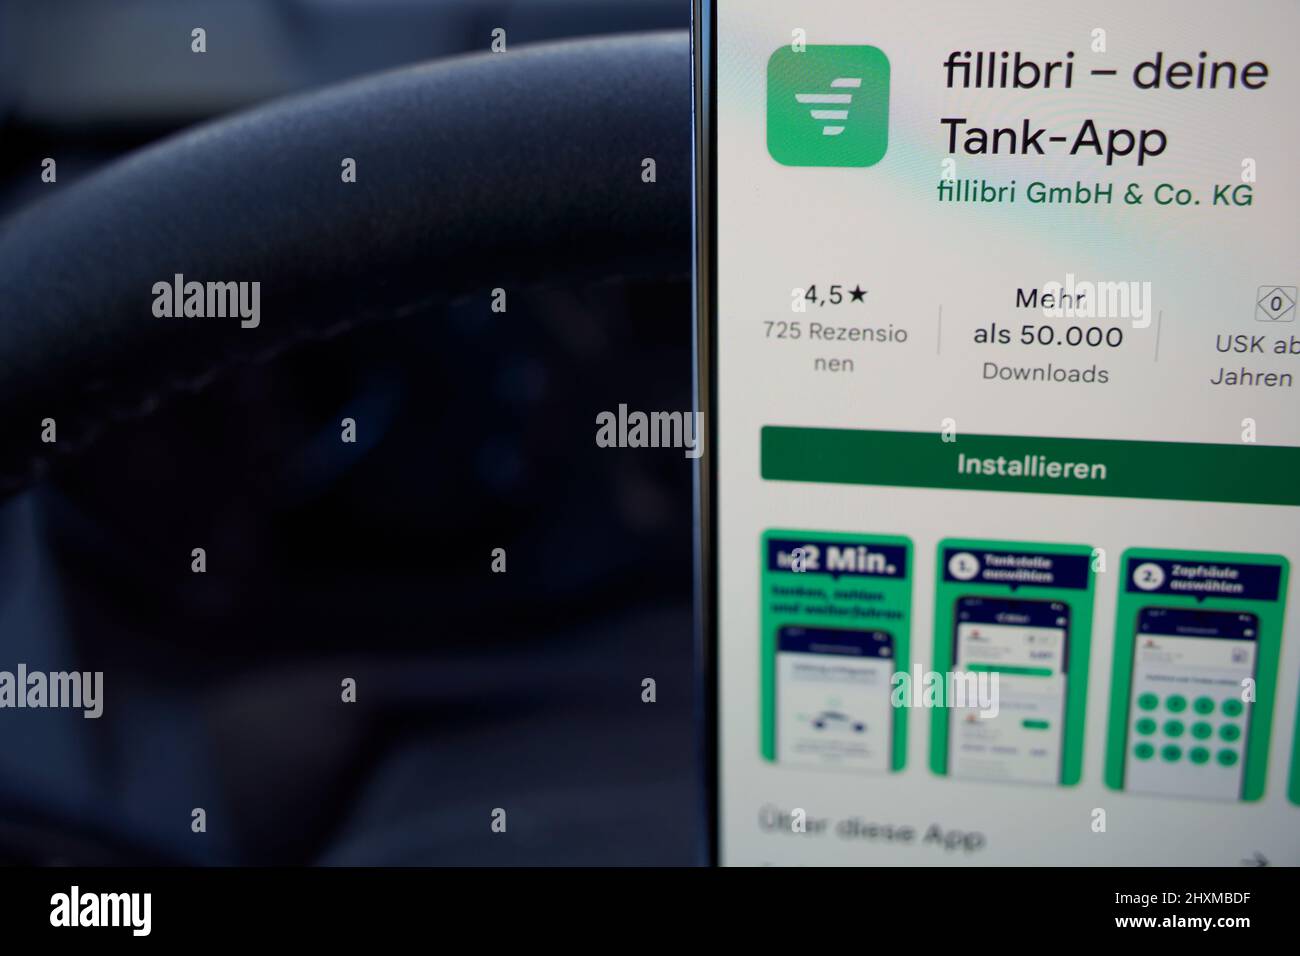 Stuttgart, Germany - March 11, 2022: Smartphone app Fillibri tank app, always finds the cheapest gas station (Tankstelle). Icon launcher on screen in Stock Photo